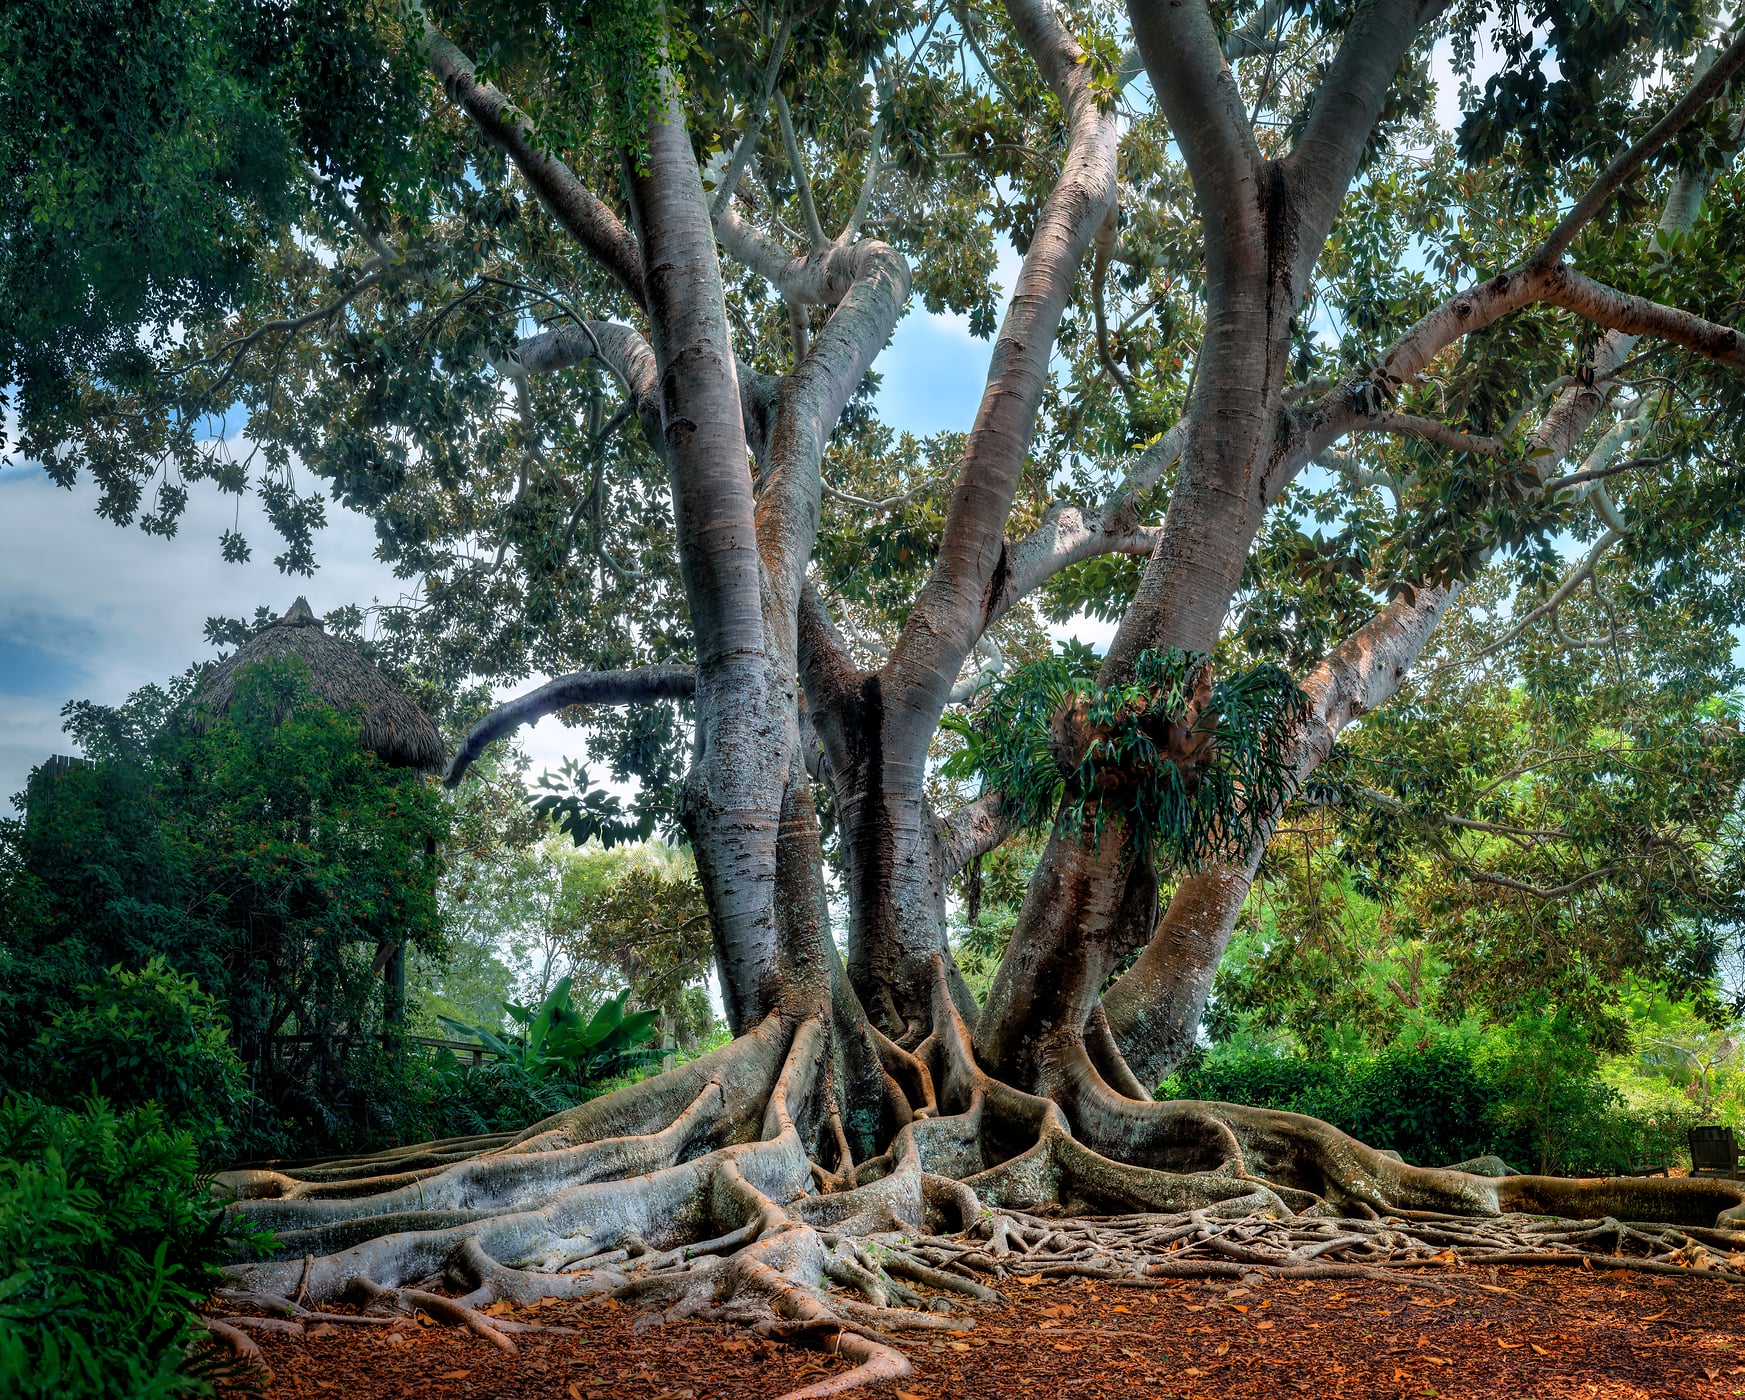 271 megapixels! A very high resolution, large-format VAST photo print of a large tree in the jungle; photograph created by Phil Crawshay at the Marie Selby Botanical Gardens in Sarasota, Florida.